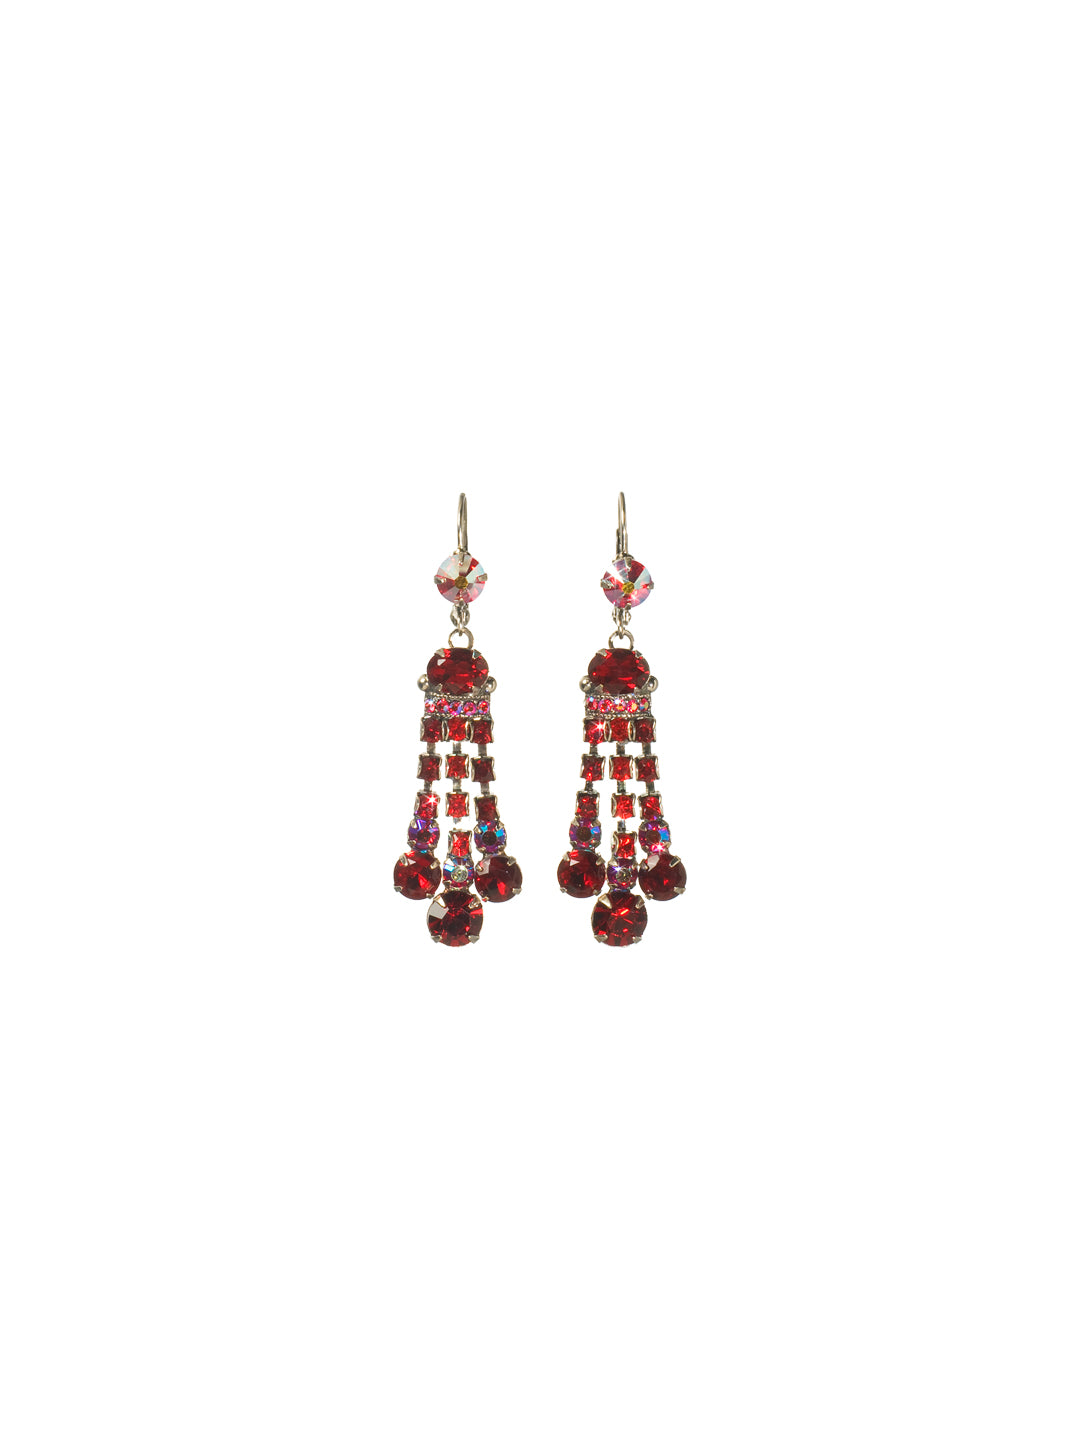 Eleanor Dangle Earring - ECC1ASCB - The Eleanor Dangle Earrings are a beautiful statement piece. Rows of crystals dangle in delicate lines off of a French wire. From Sorrelli's Cranberry collection in our Antique Silver-tone finish.